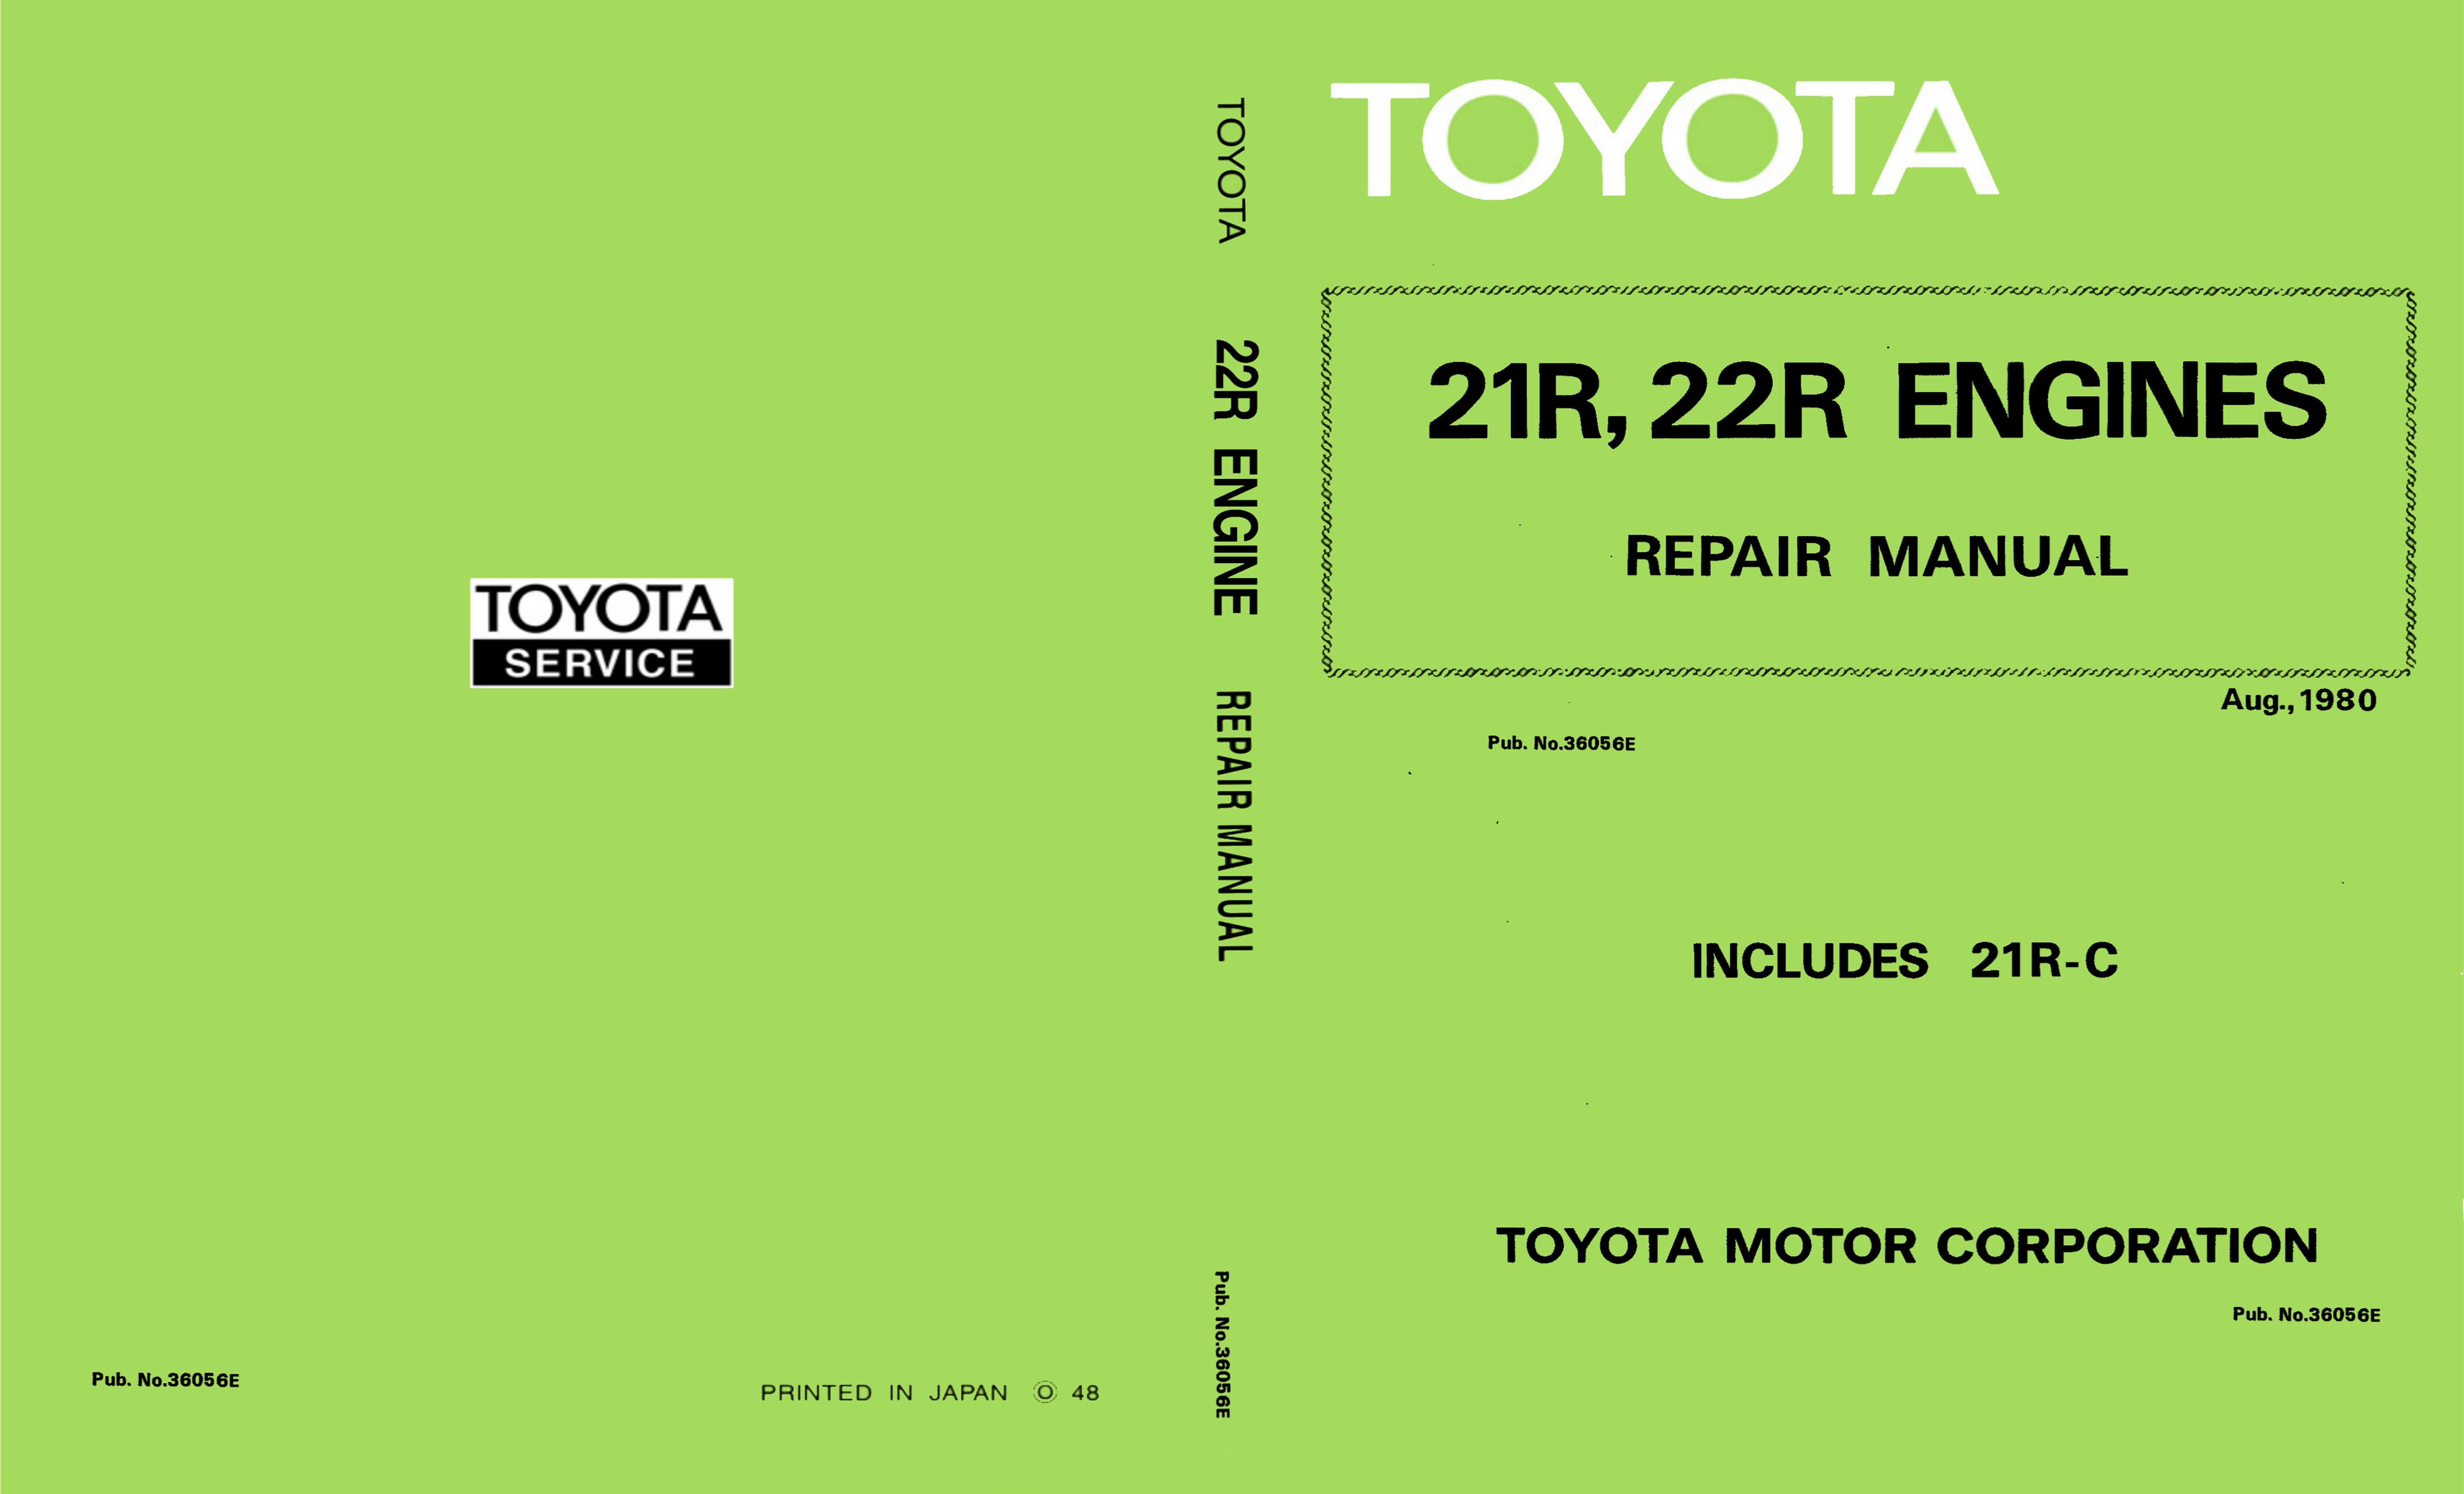 Toyota 22R manual cover image